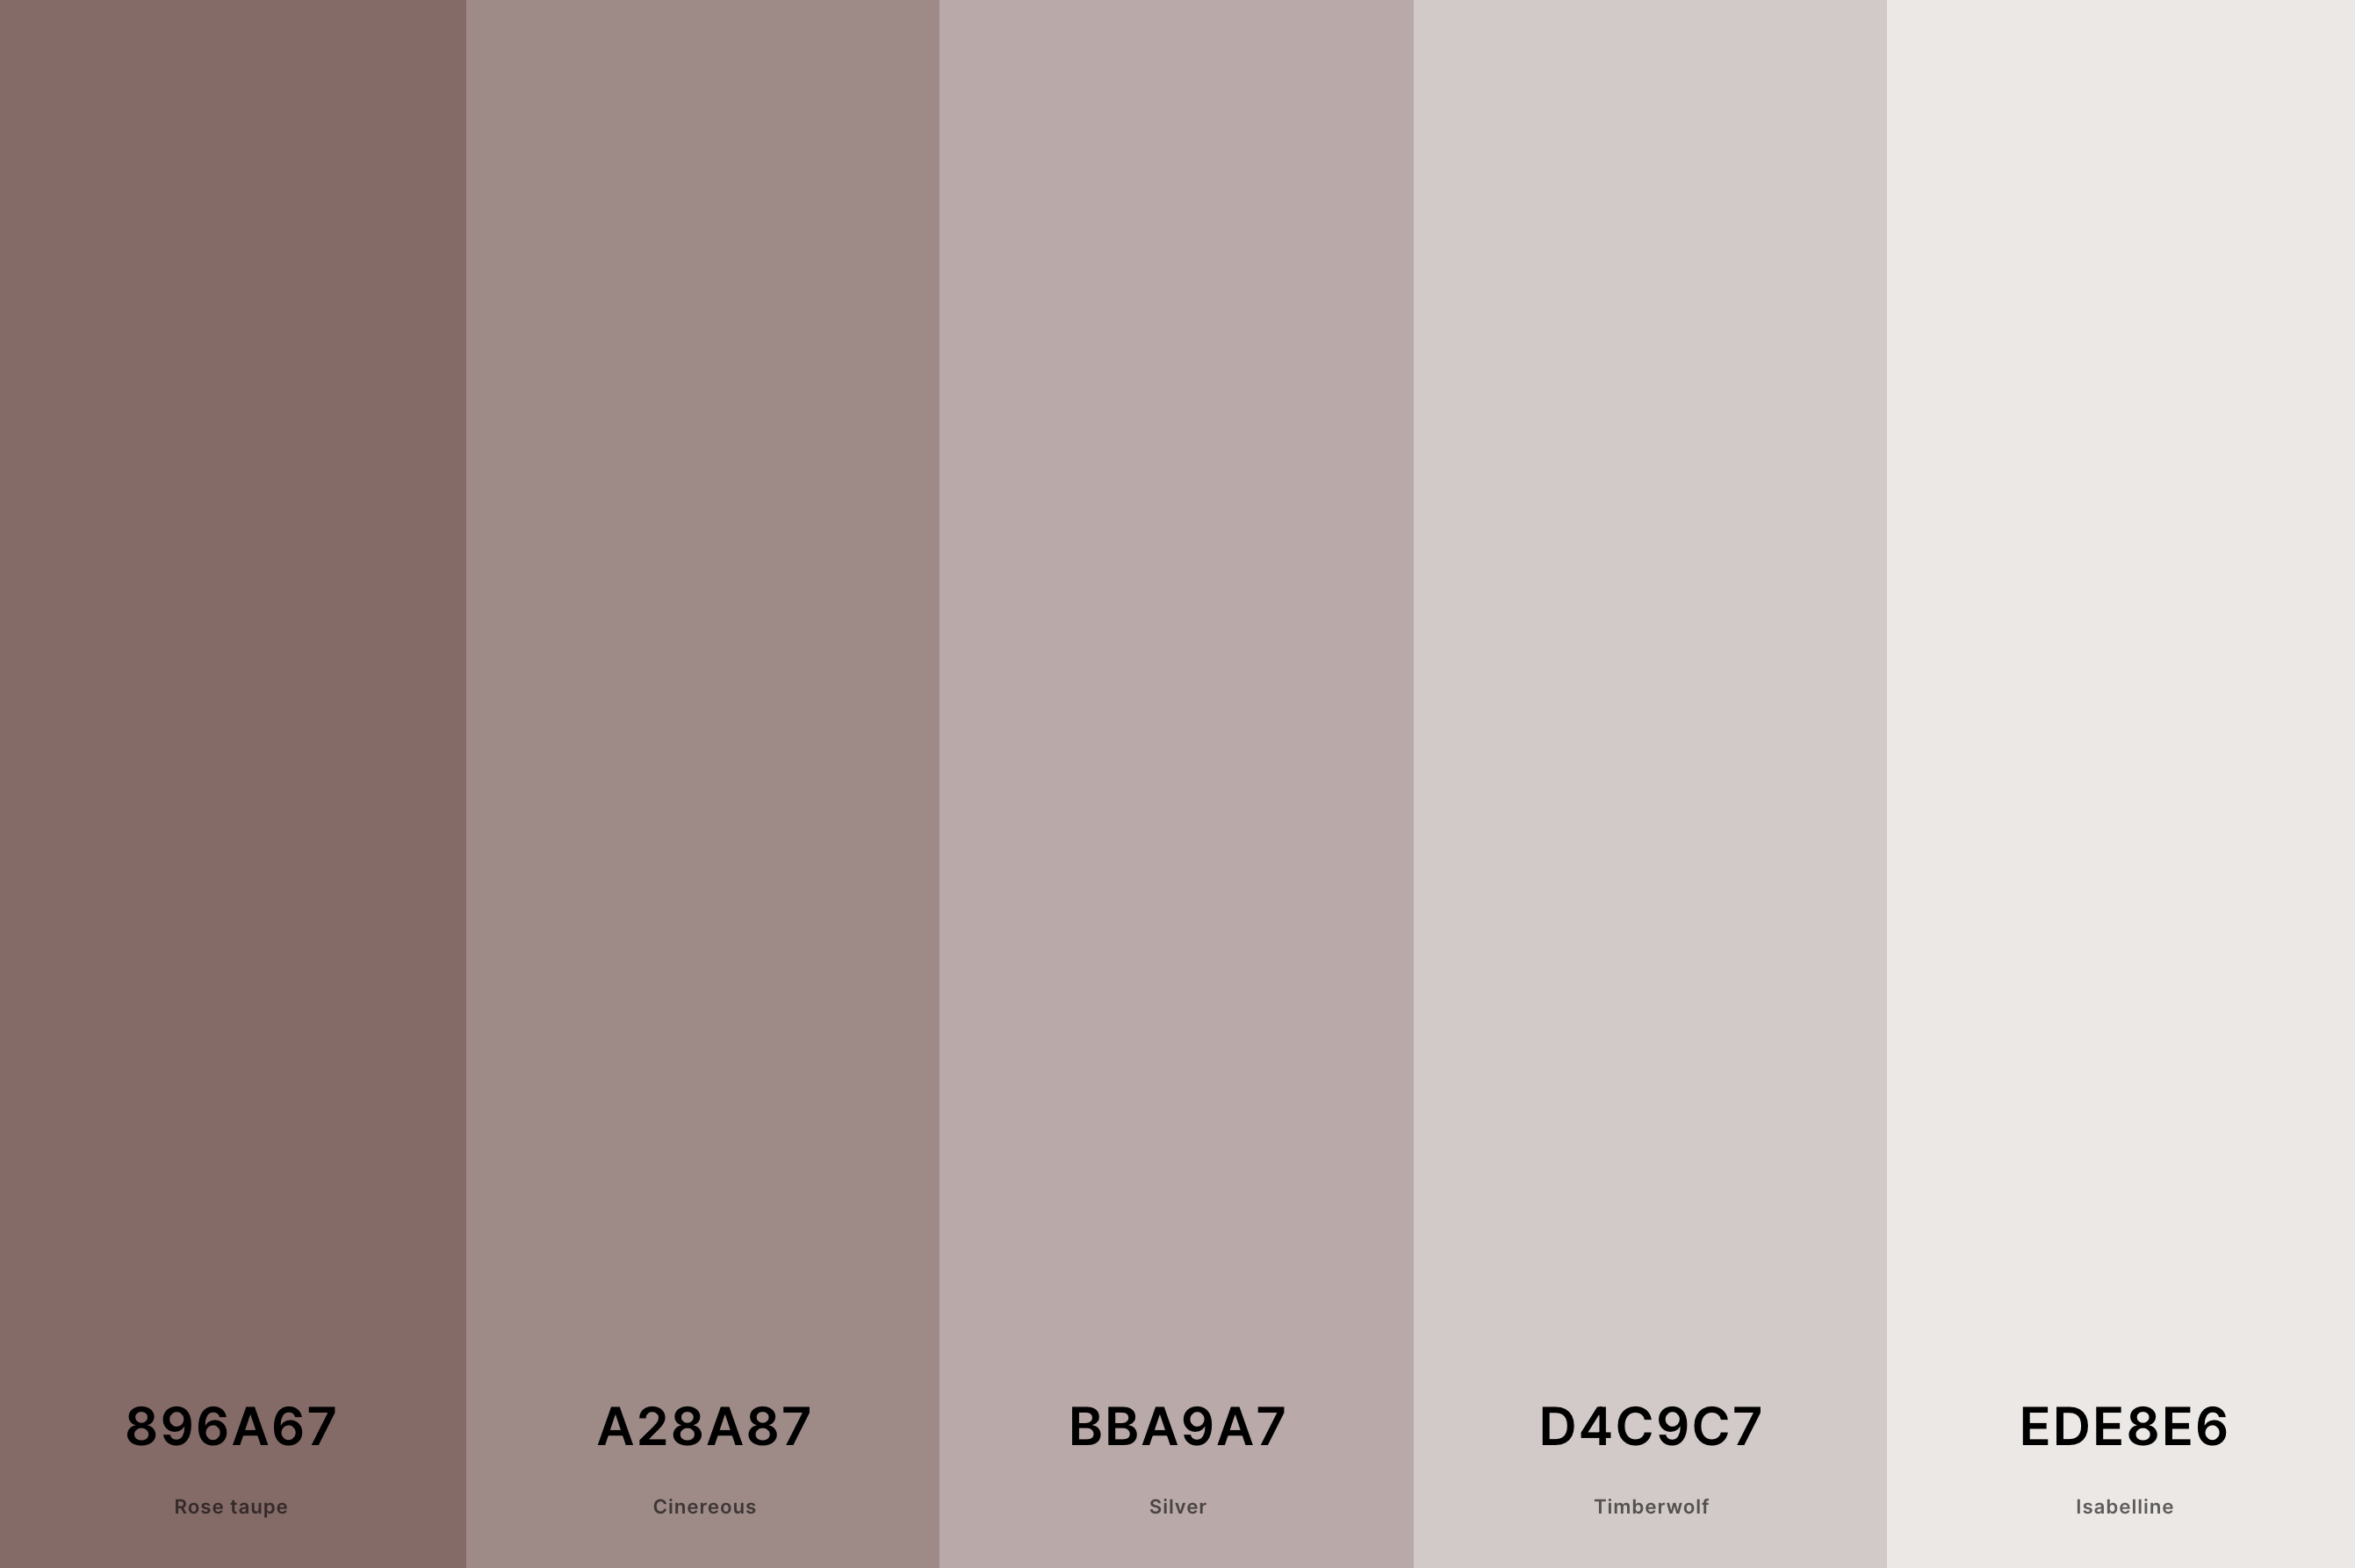 26. Light Neutral Color Palette Color Palette with Rose Taupe (Hex #896A67) + Cinereous (Hex #A28A87) + Silver (Hex #BBA9A7) + Timberwolf (Hex #D4C9C7) + Isabelline (Hex #EDE8E6) Color Palette with Hex Codes